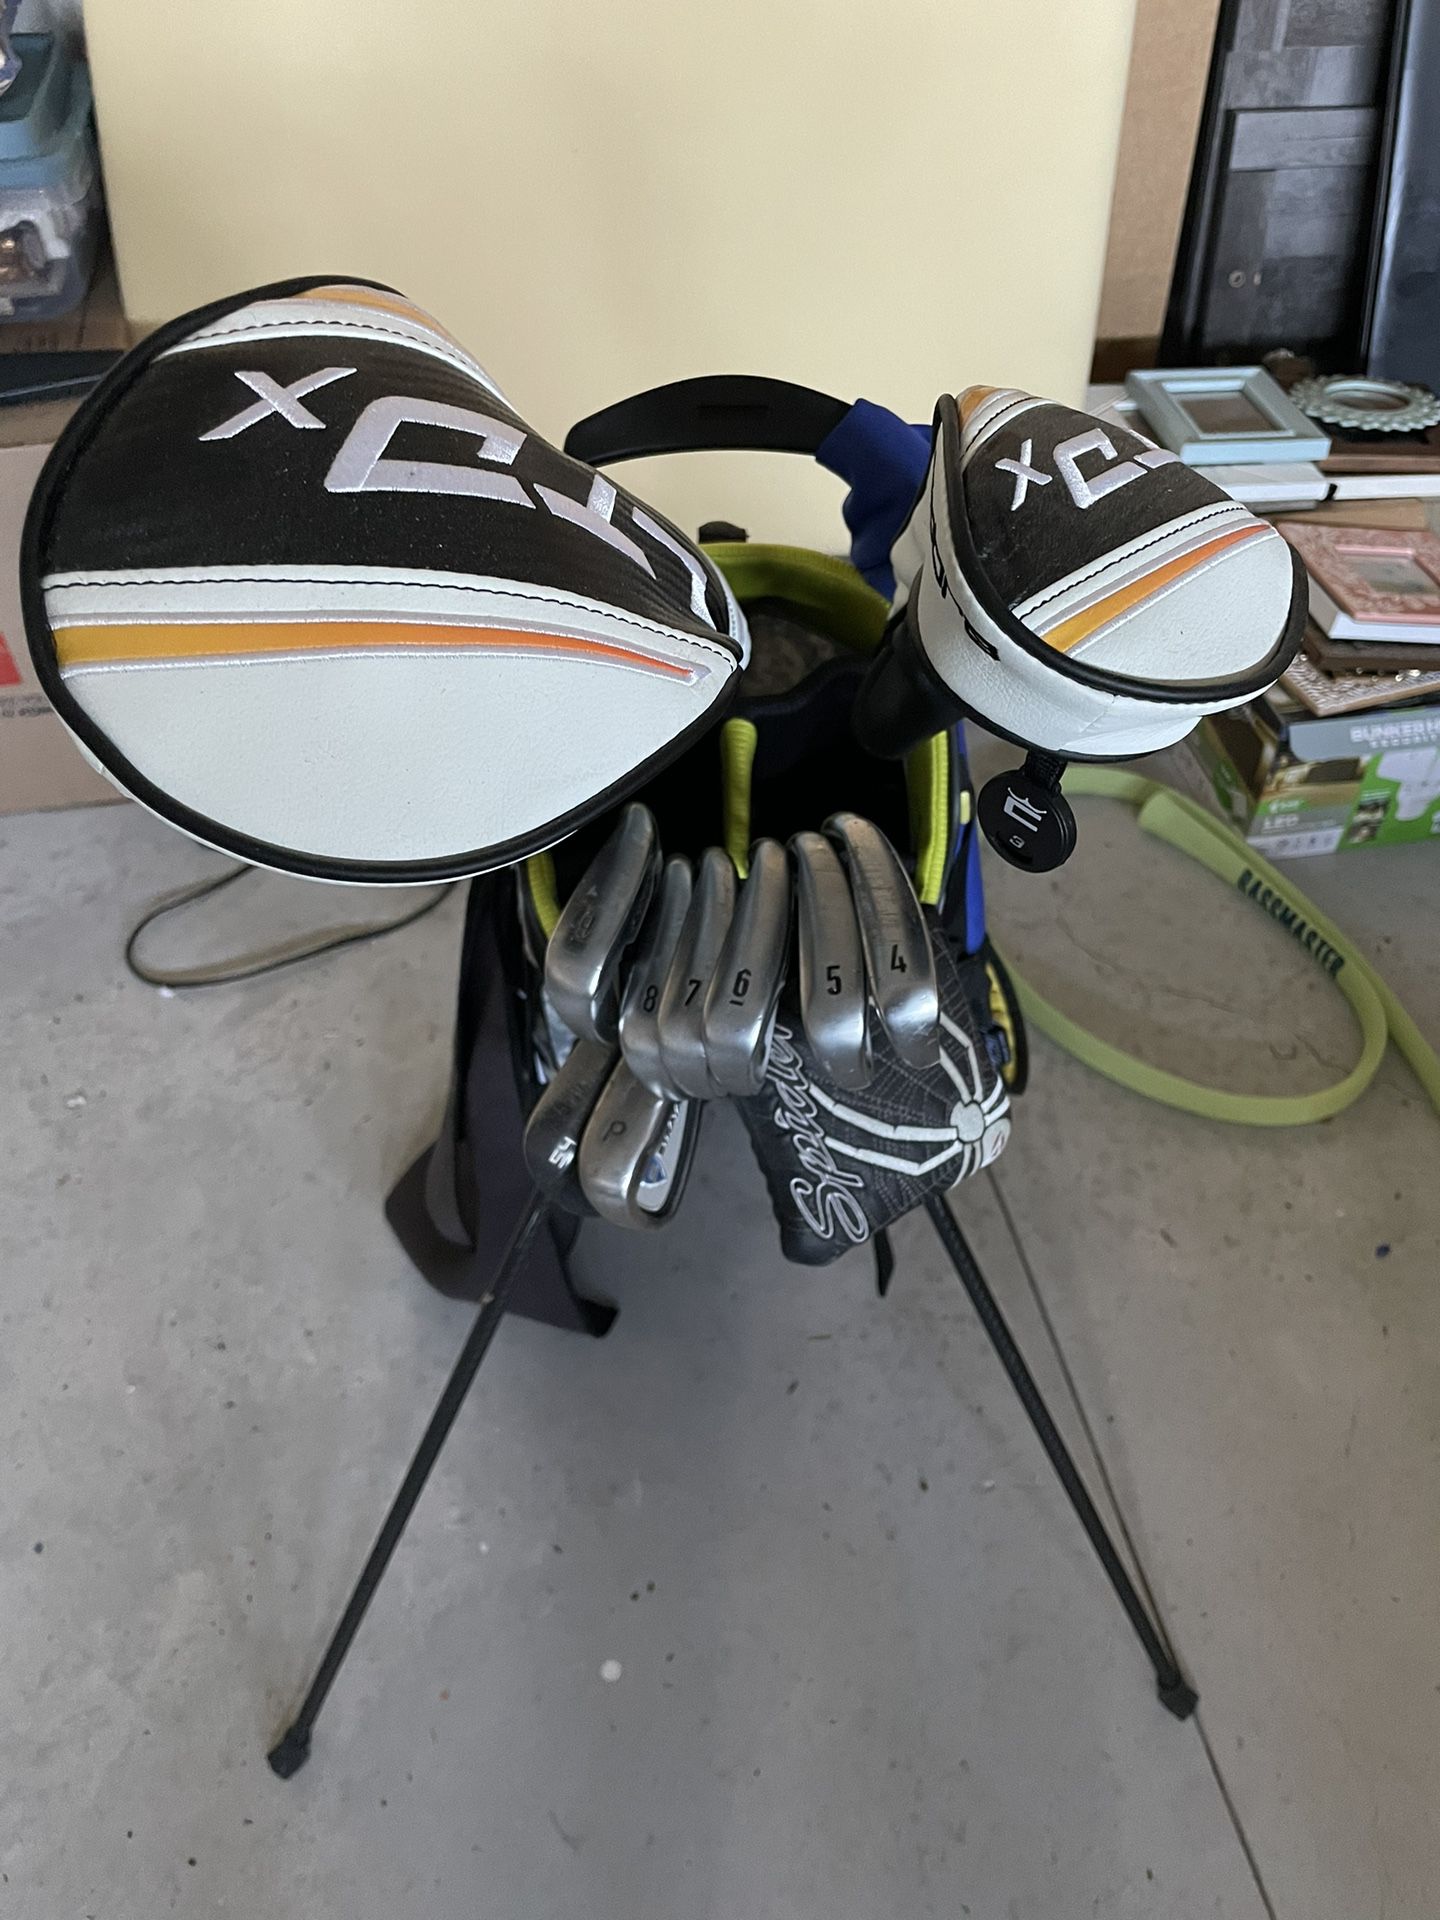 Callaway Clubs And Bag